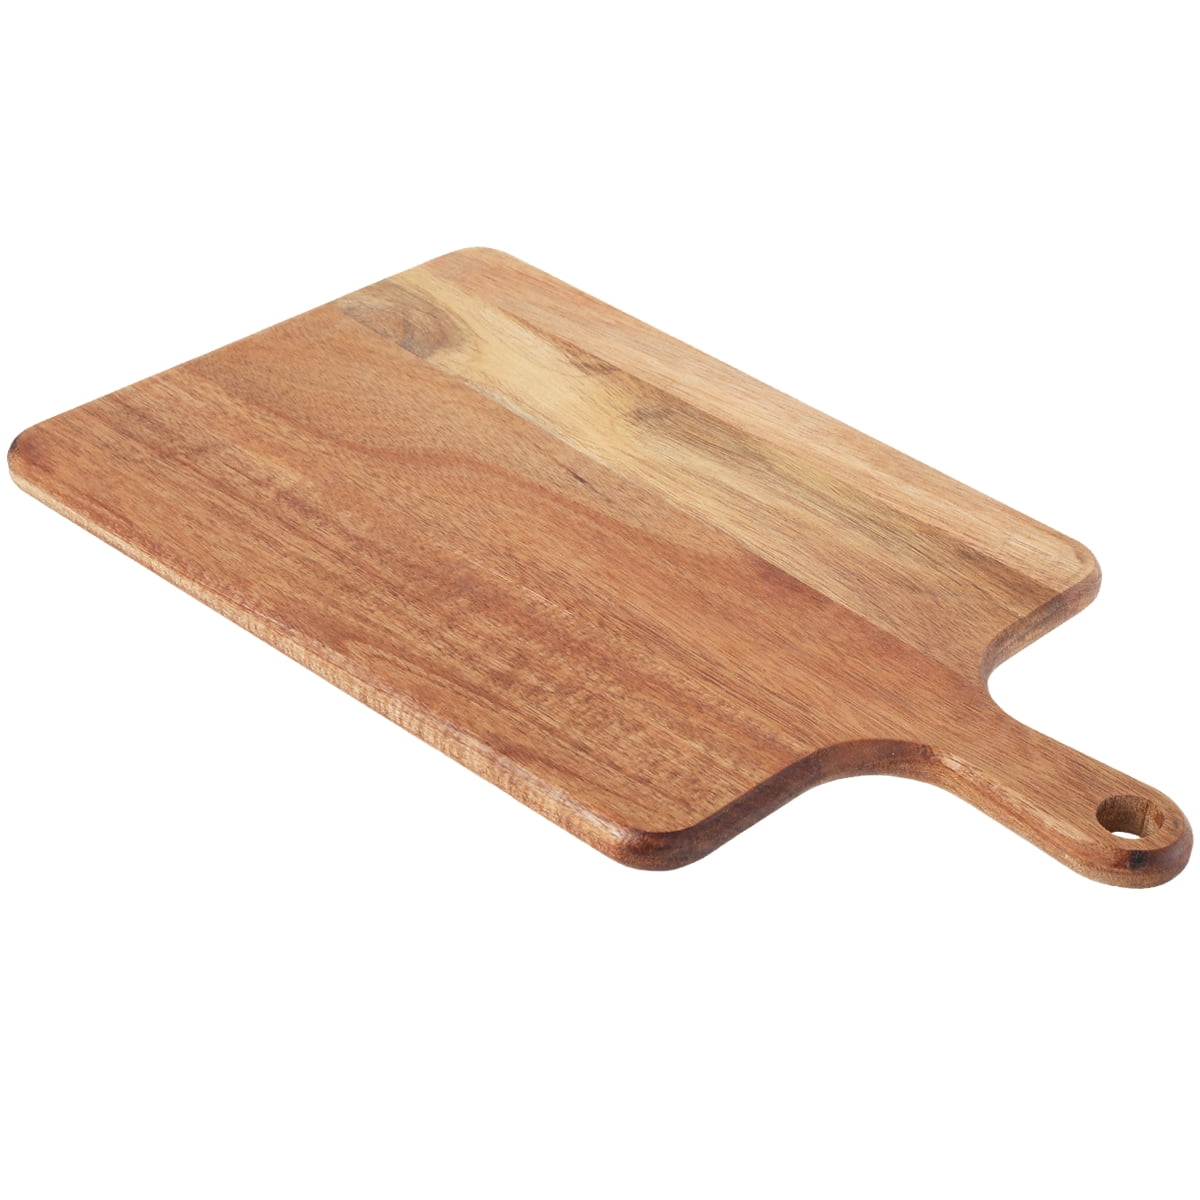 IXTIX Wood Cutting Board Wooden Charcuterie Board with Handle 3 x 7.9  Inches Portable Wooden Dinner Plate Serving Tray Kitchen Chopping Board